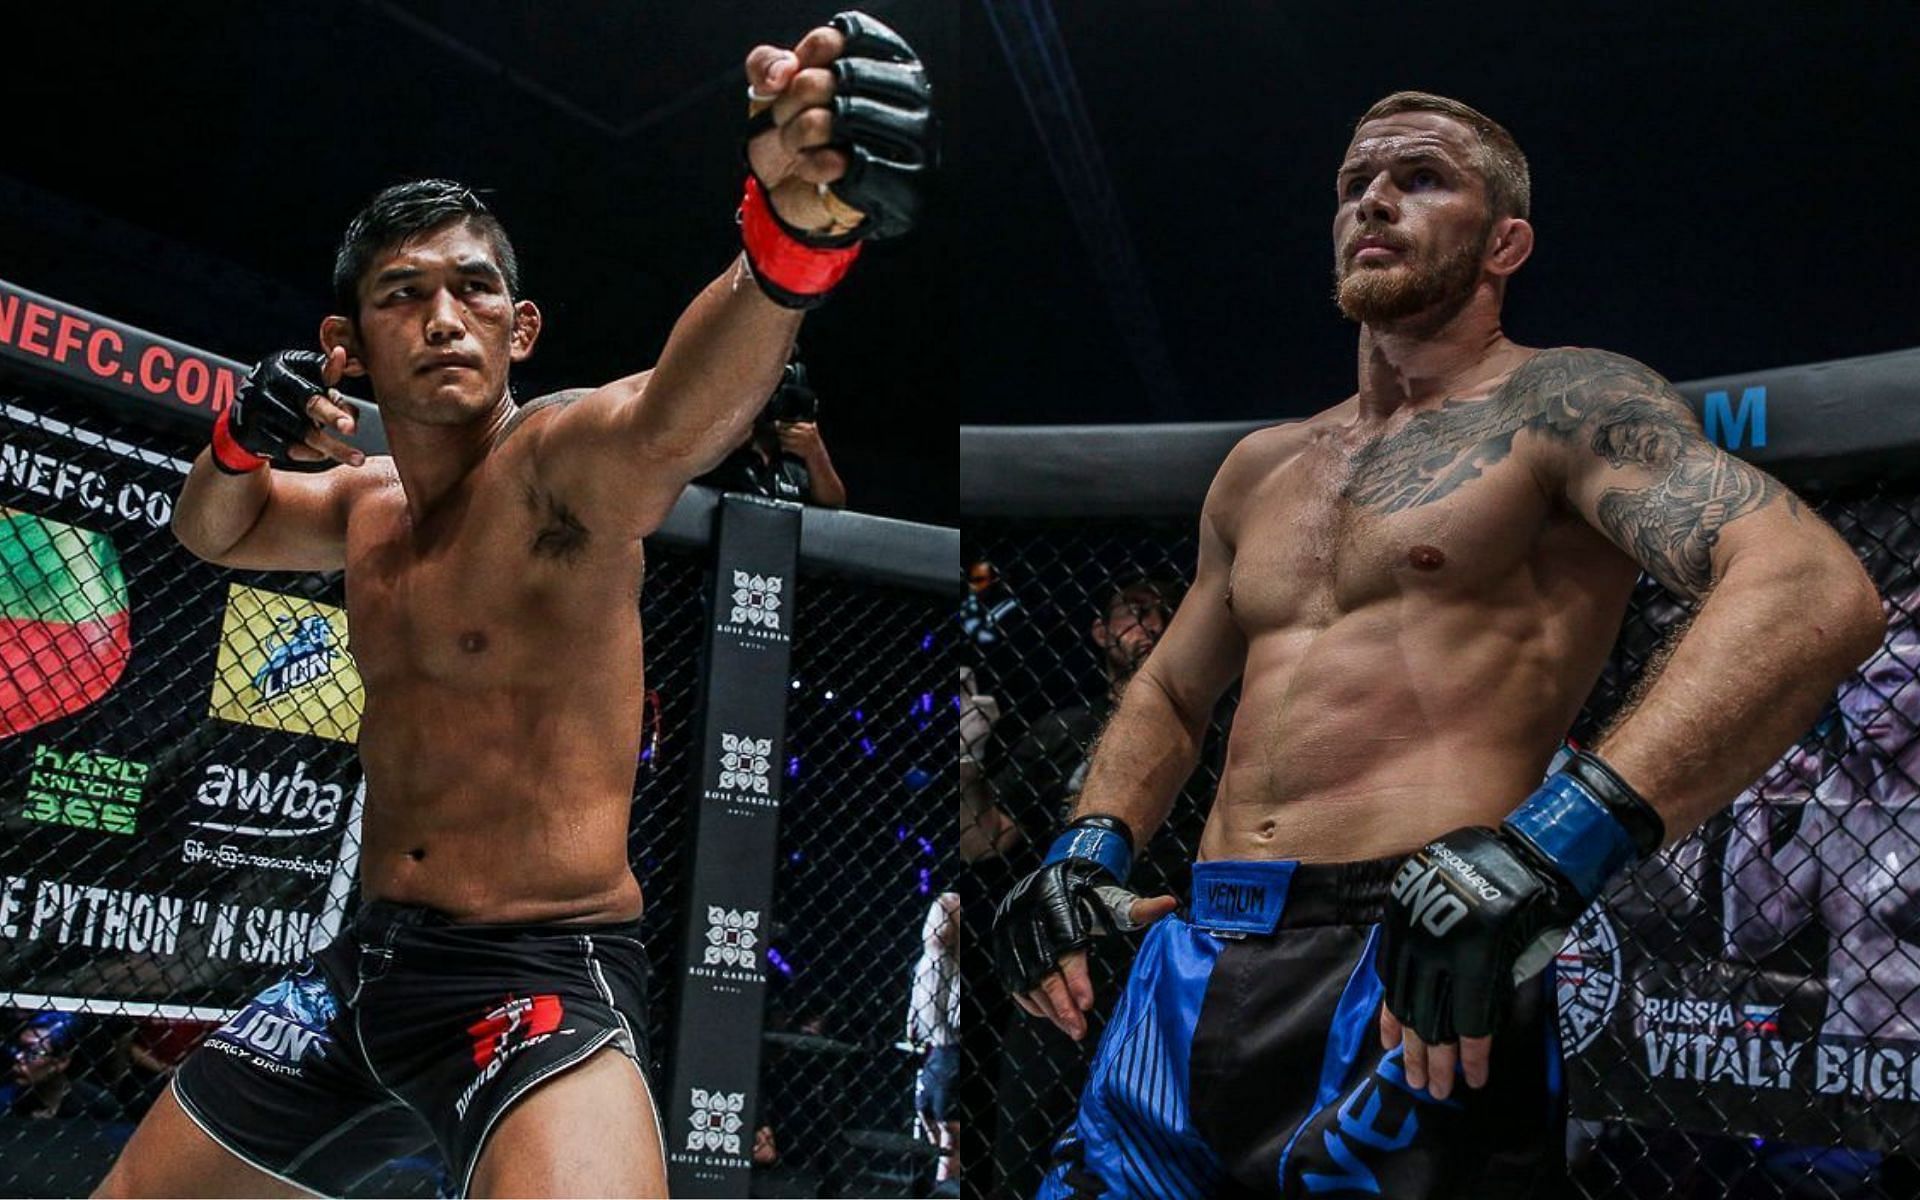 Aung La Nsang owes his career growth after battling Vitaly Bigdash | Photo: ONE Championship